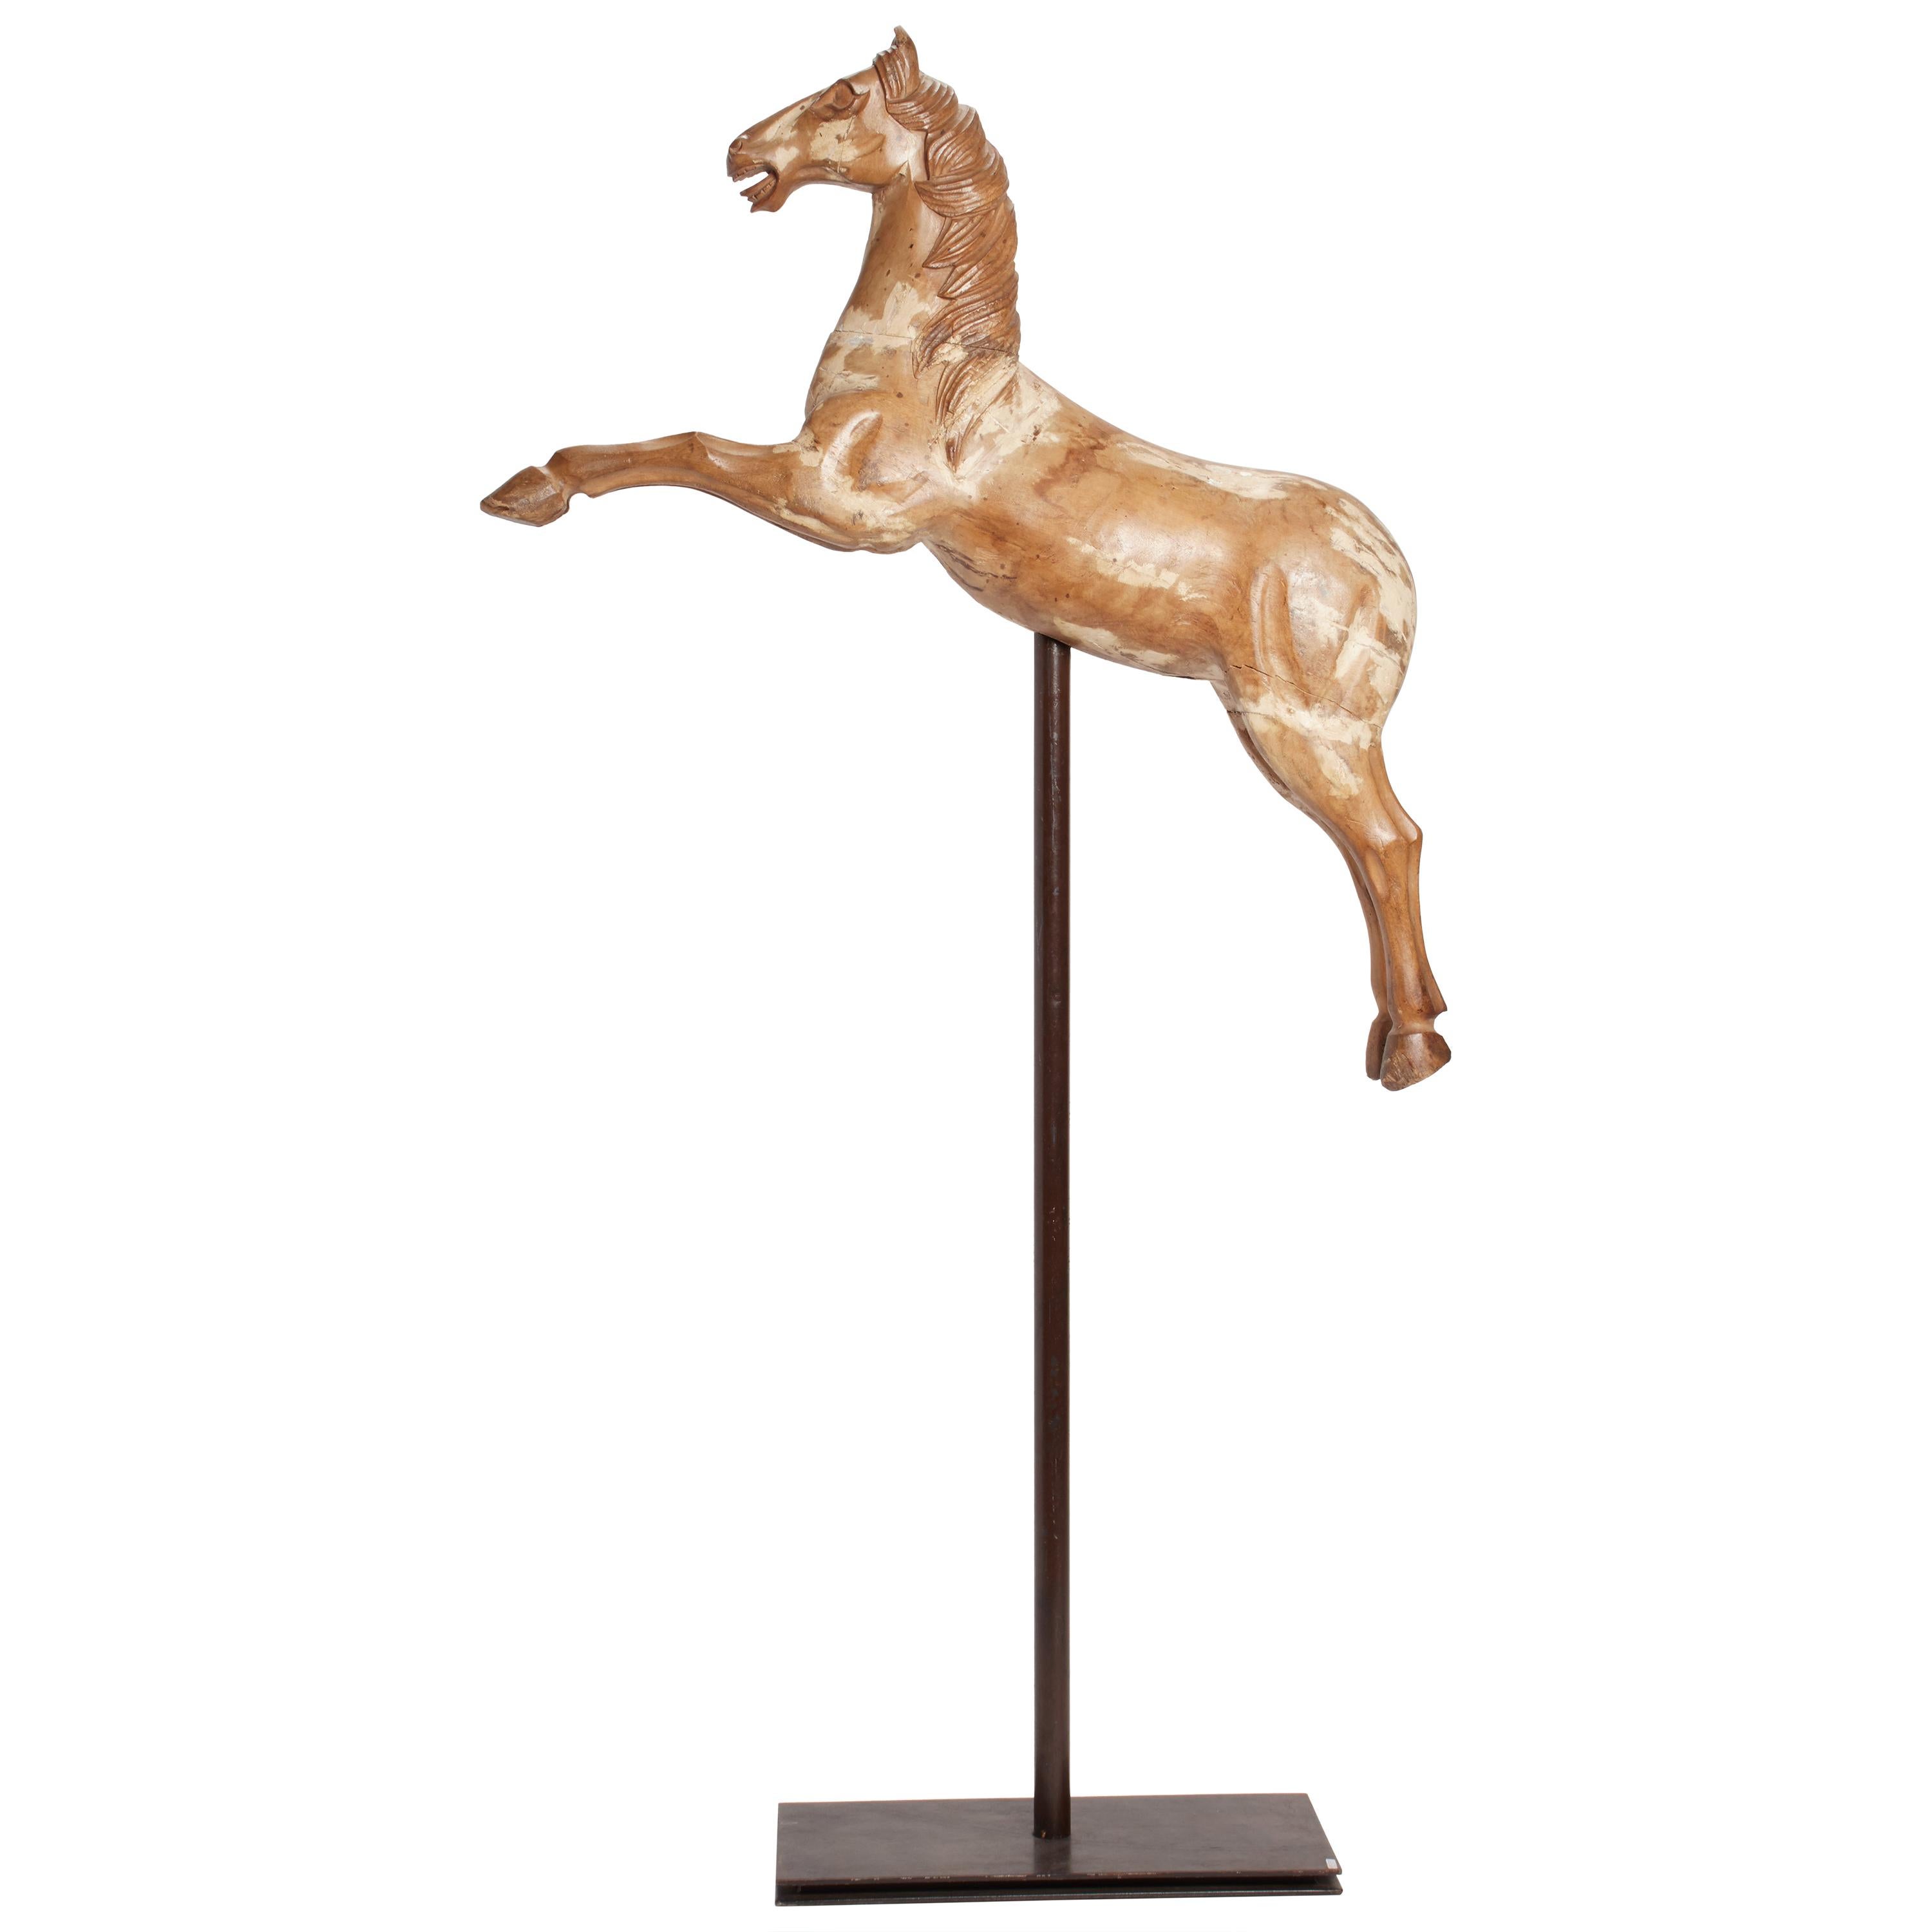 Wooden Sculpture of a Rampant Carrousel Horse, Italy, 1750